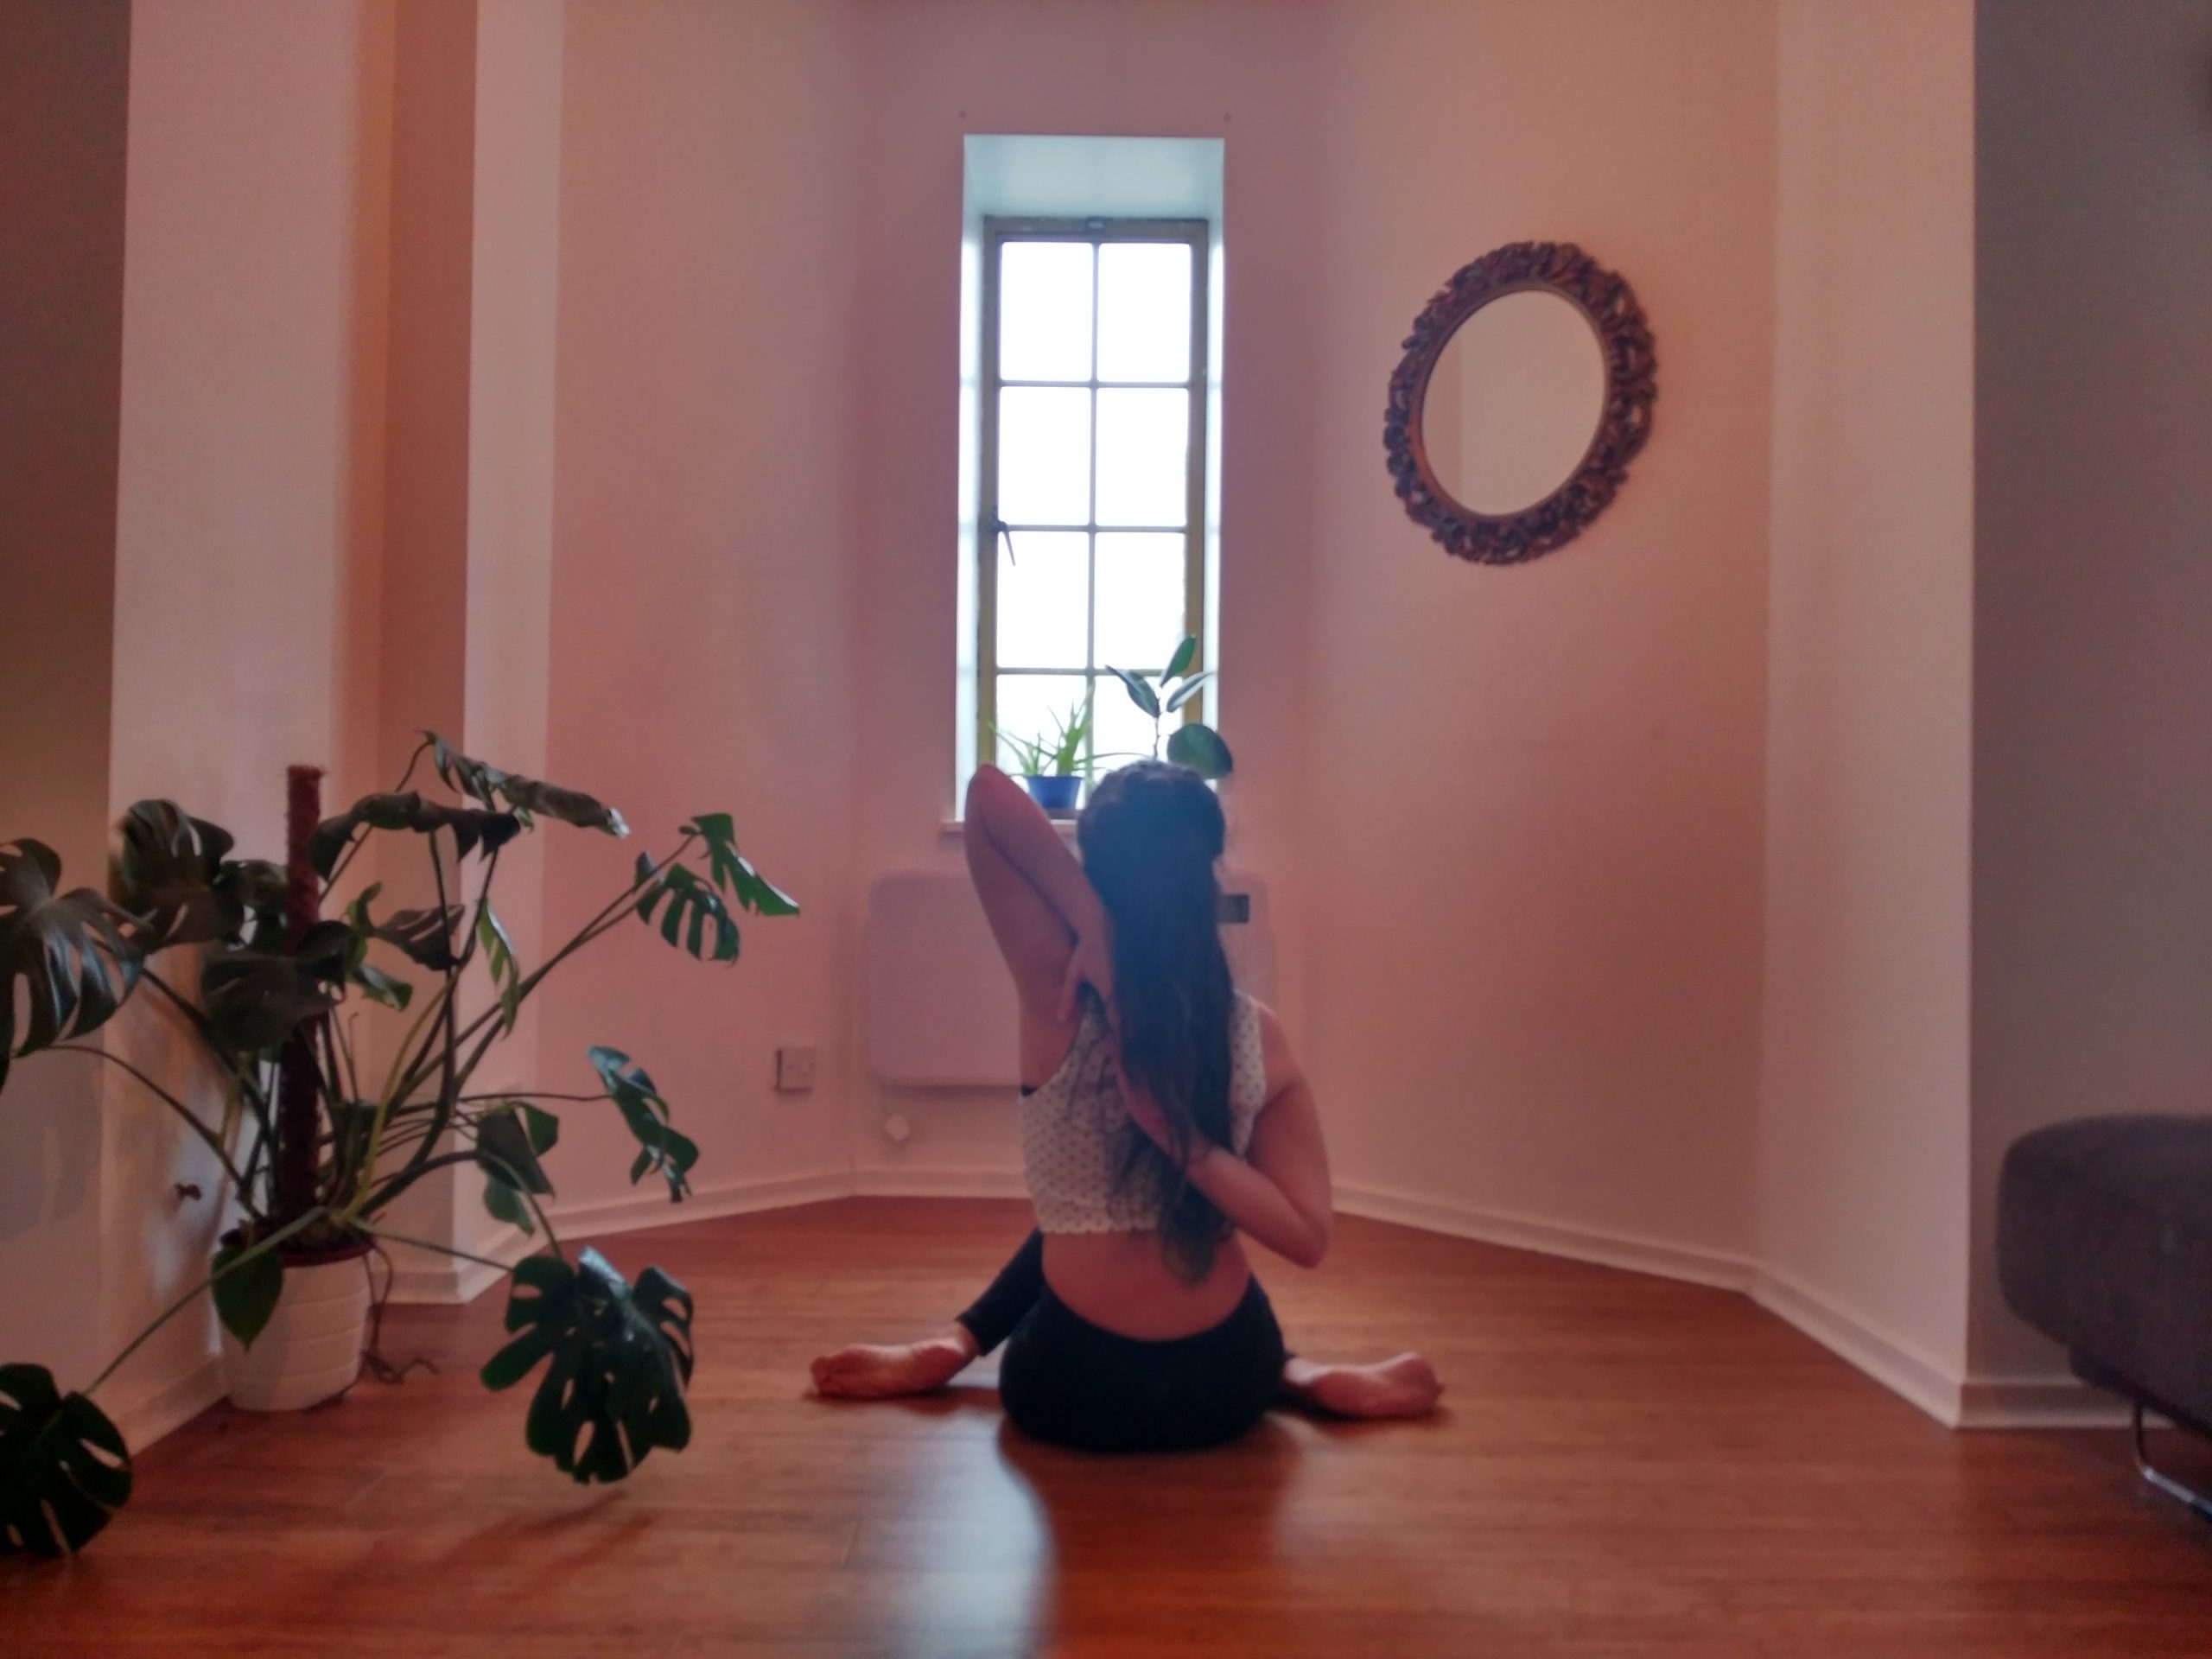 Thin-waisted woman sitting on the floor in yoga pose from the front of room's window